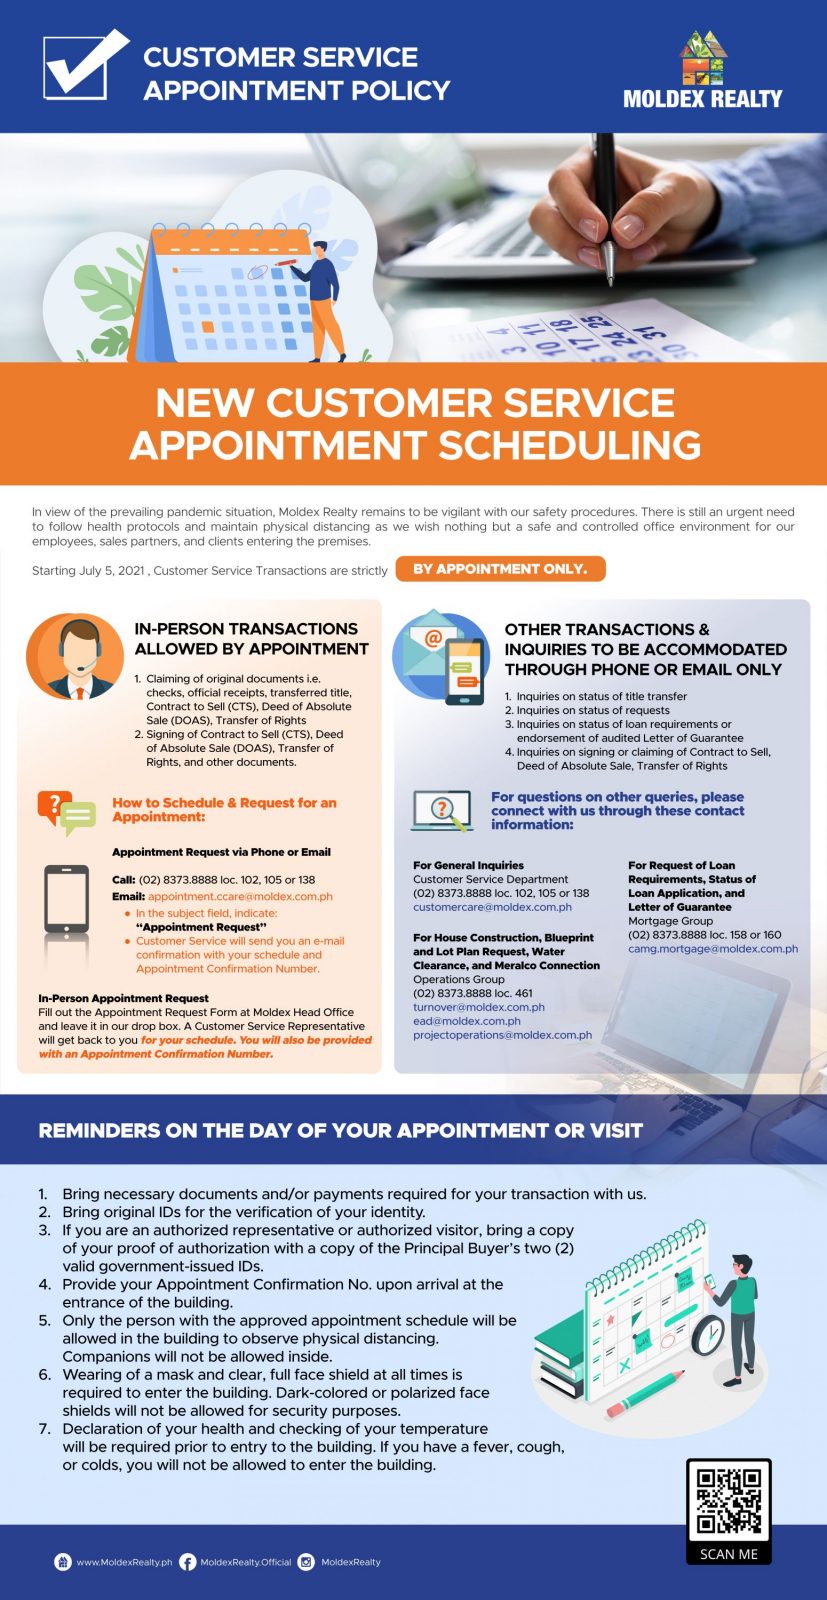 New Customer Service Appointment Scheduling